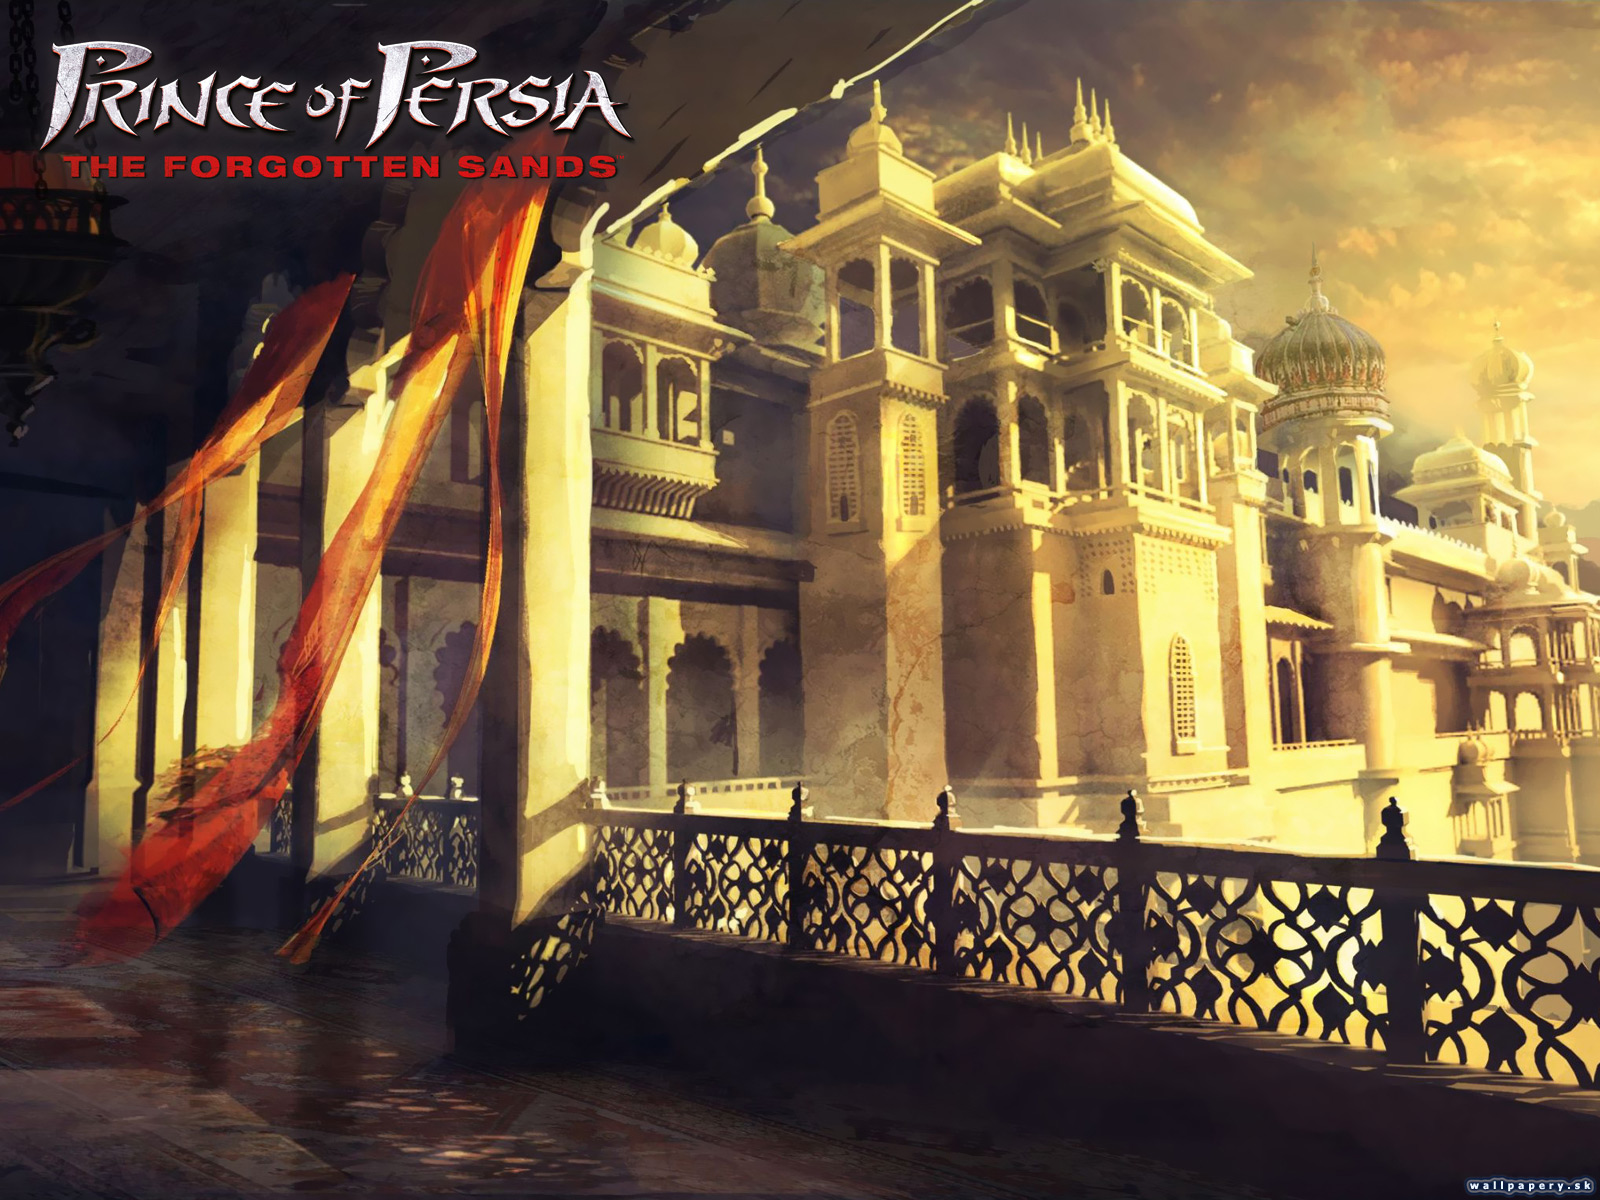 Prince of Persia: The Forgotten Sands - wallpaper 7